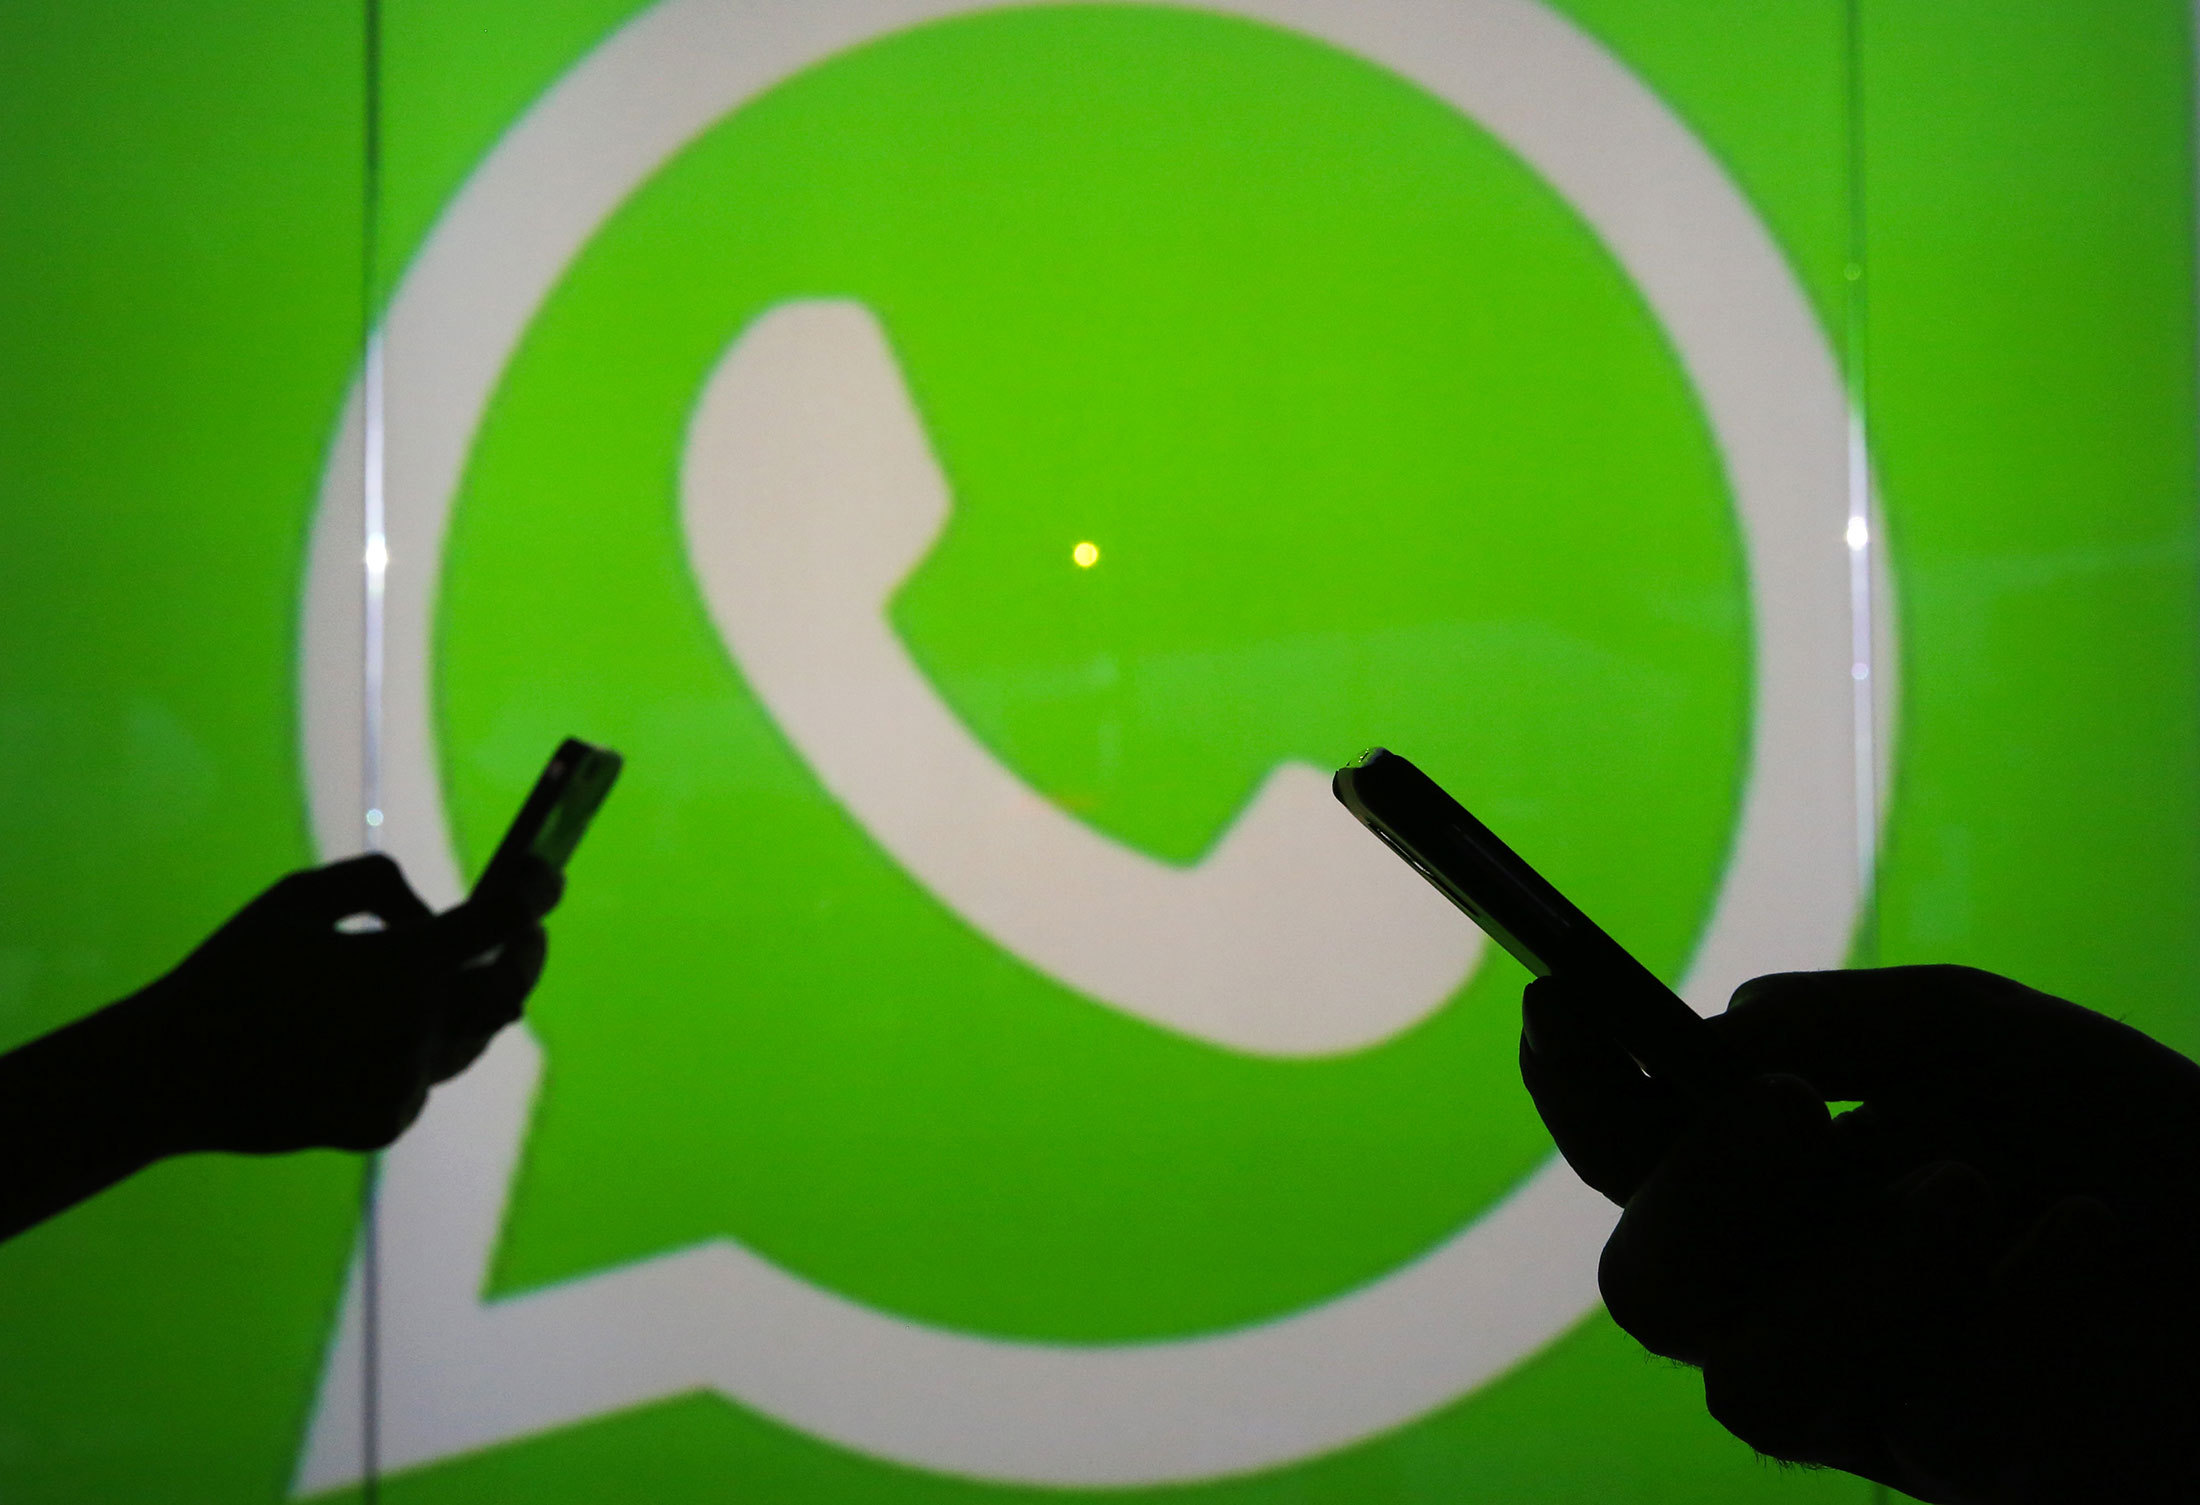 WhatsApp group admins to face jail over fake news